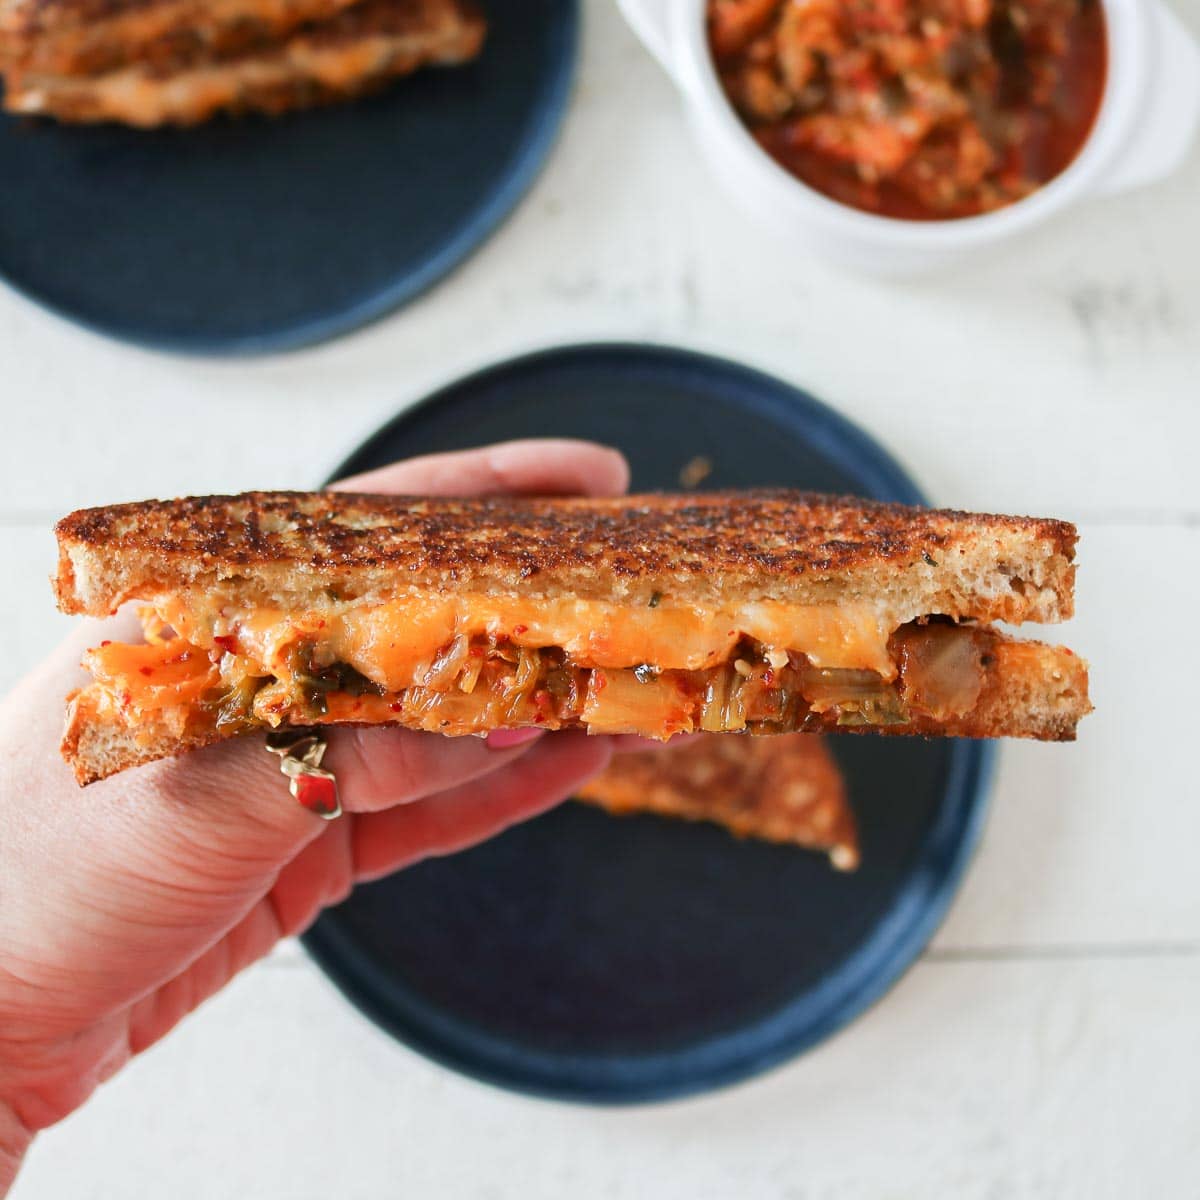 Hand holding a kimchi grilled cheese sandwich.